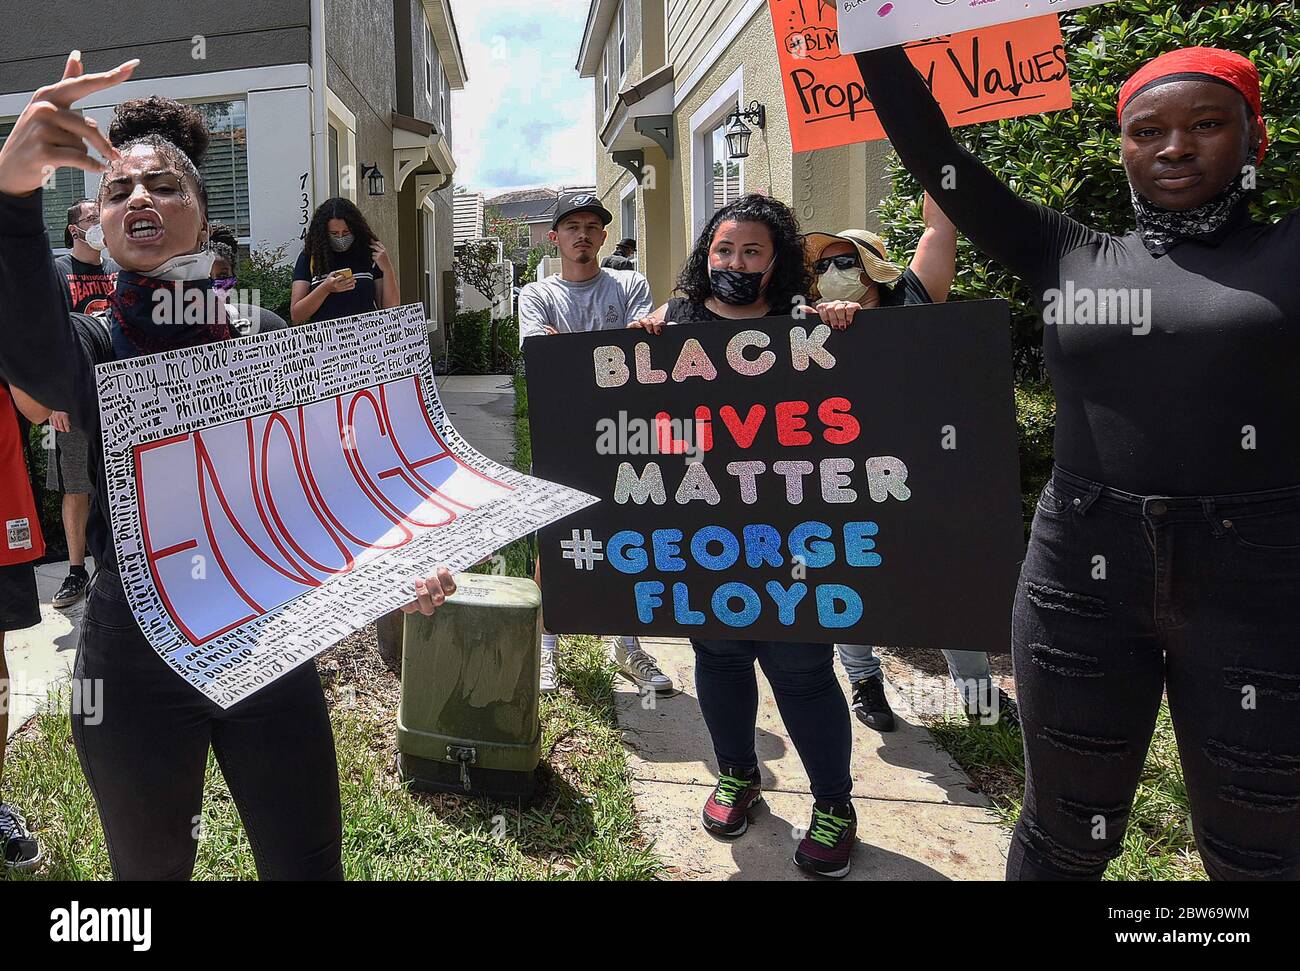 Windermere, United States. 29th May, 2020. Demonstrator hold placards during a protest outside a home owned by Derek Chauvin, the Minneapolis police officer videotaped kneeling on the neck of George Floyd before his death. The incident has sparked protests across the country. Credit: SOPA Images Limited/Alamy Live News Stock Photo